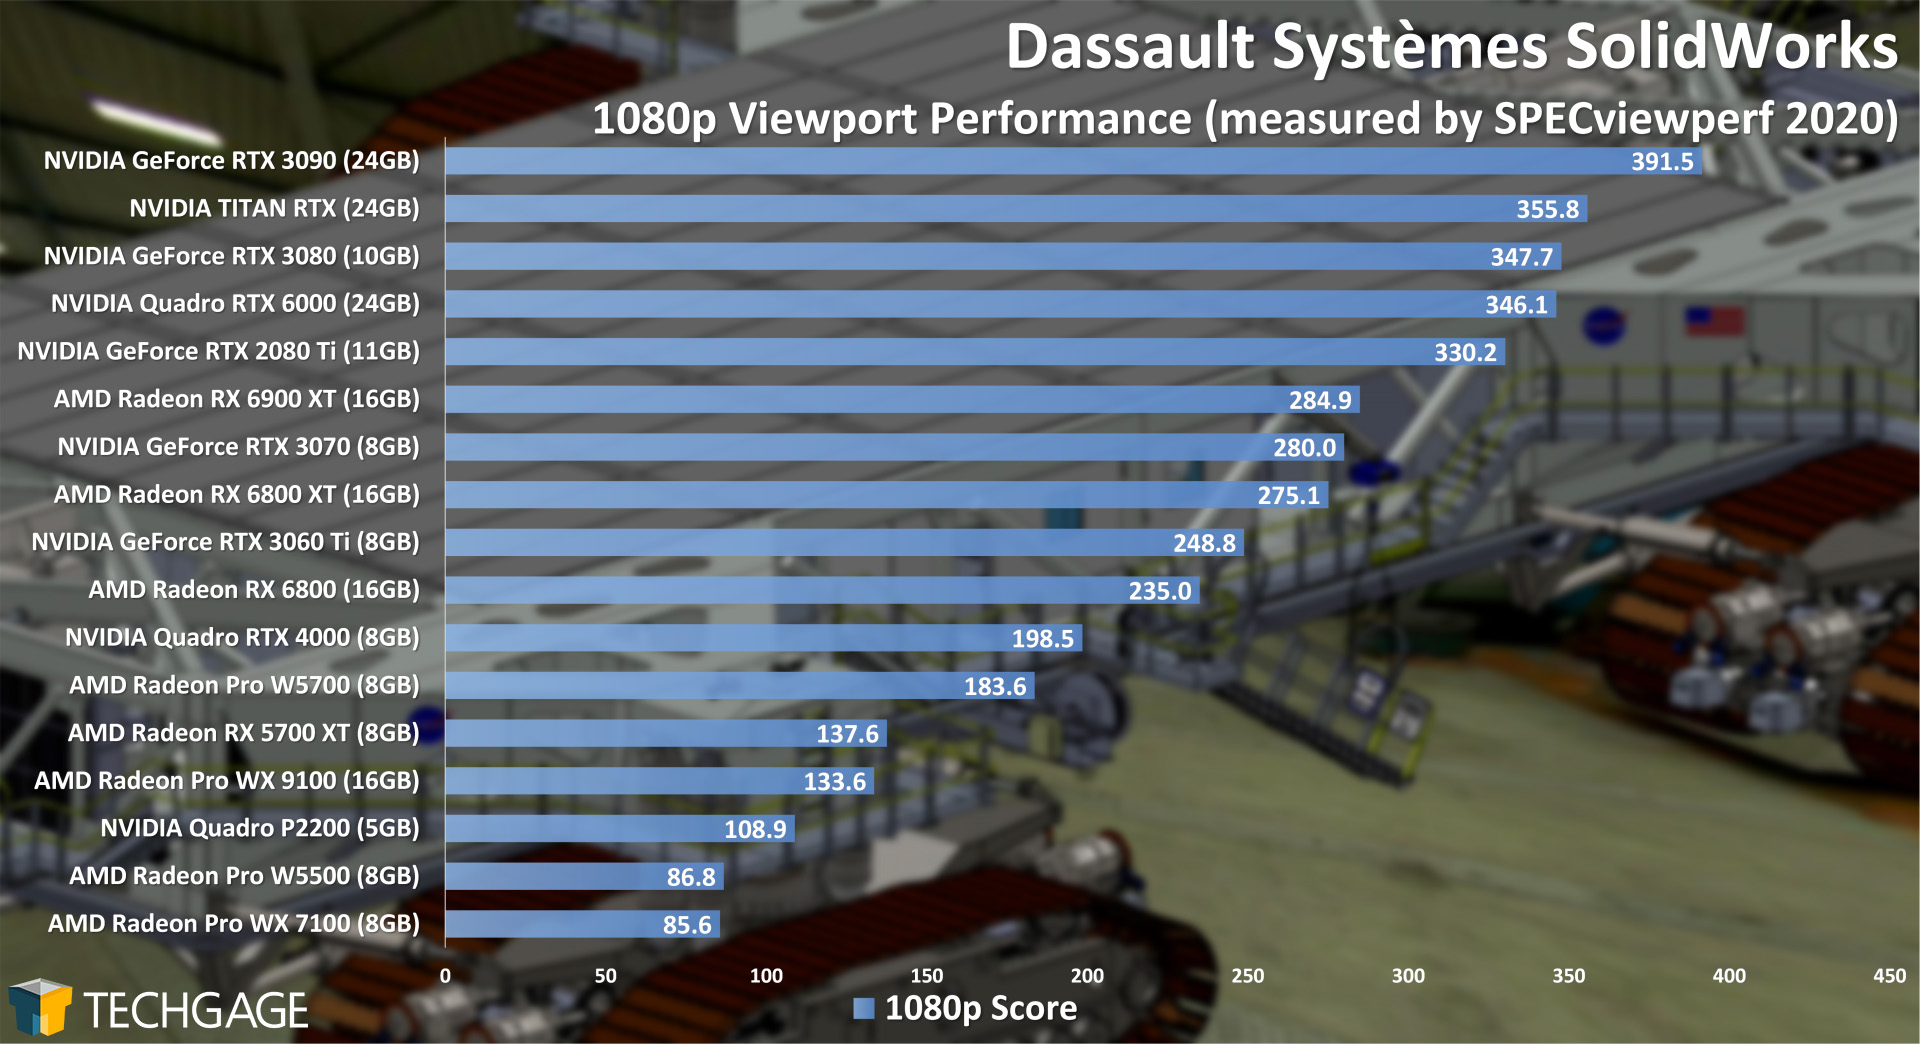 Dassault-Systemes-SolidWorks-1080p-Viewport-Performance-February-2021.jpg